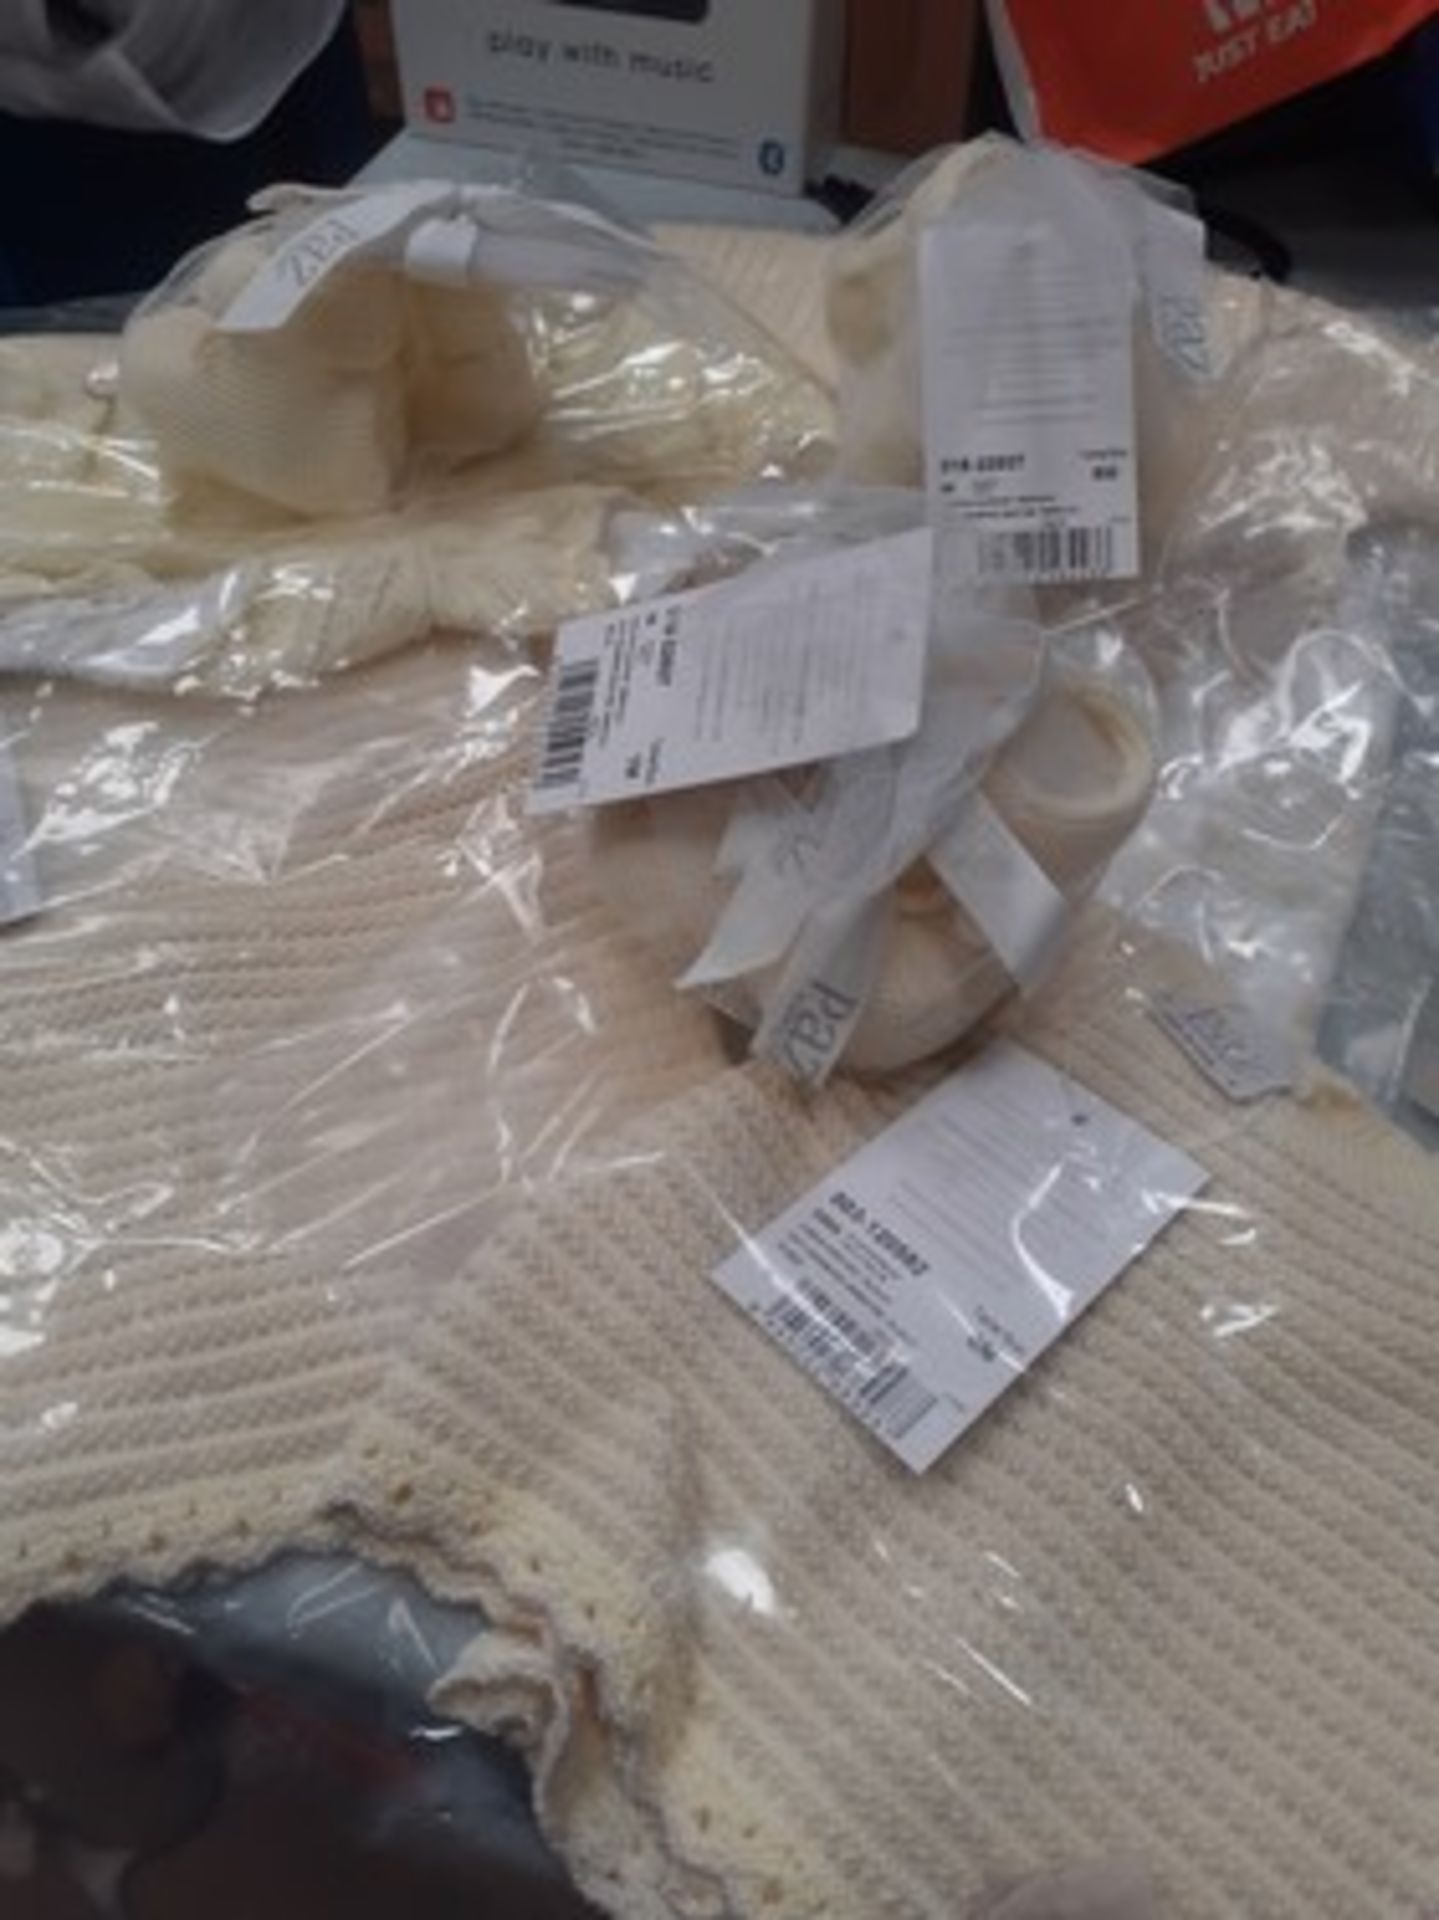 12 x Paz Rodriguez baby clothes in lemon including 4 x dresses, booties, tops, etc. - sealed new - Image 2 of 2